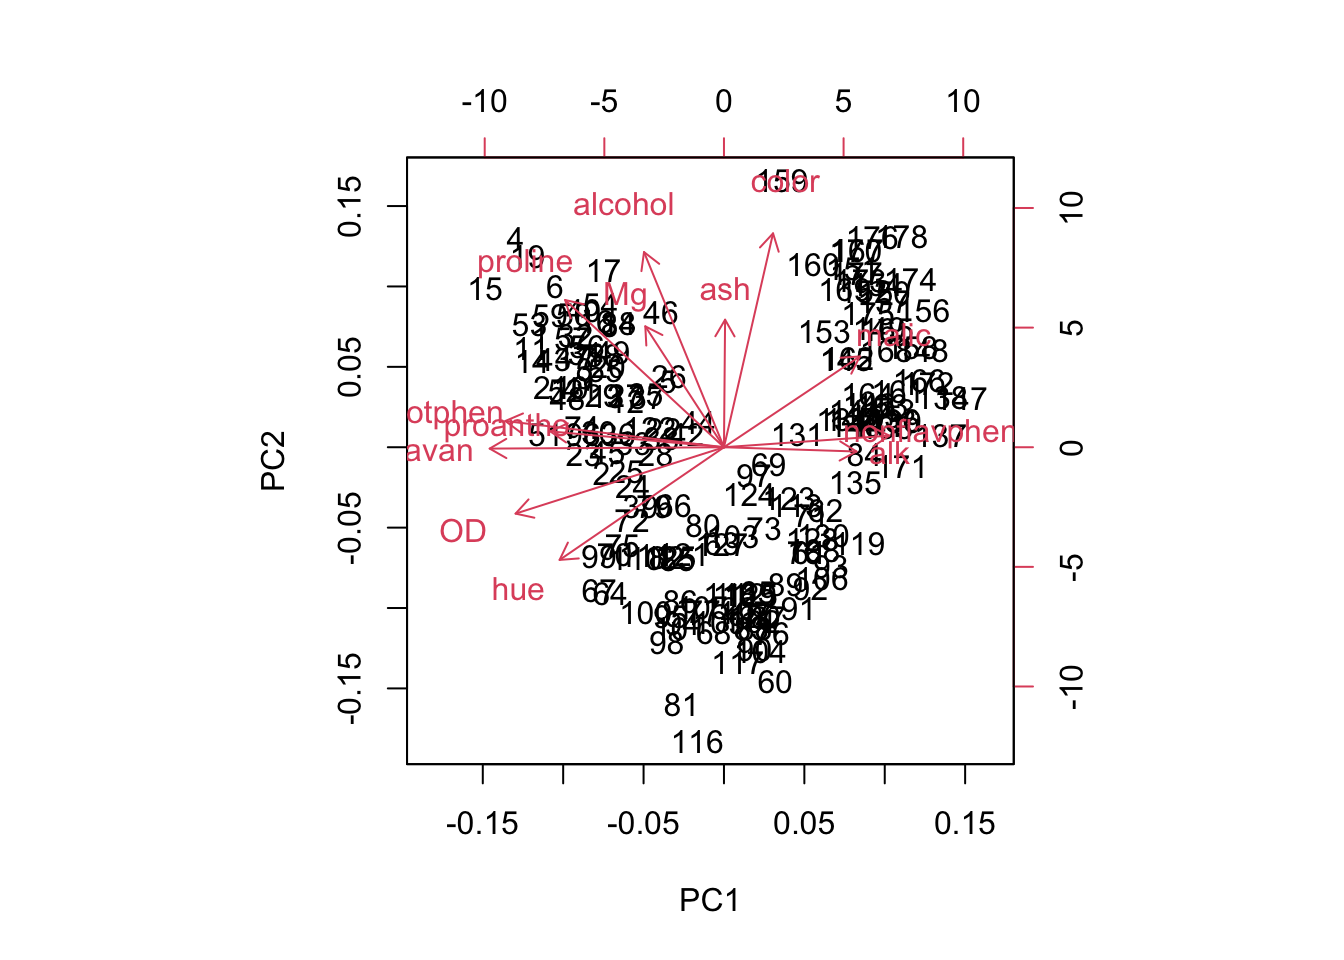 Biplot of the first two principal components for standardized data of three wine cultivars (1-59, 60-130, and 131-178), and loadings for variables alcohol, malic acid (malic), ash, alkalinity of ash (alk), magnesium (Mg), total phenol (totphen), flavonoids (flavan), nonflavanoid phenols (nonflavphen), proanthocyanins (proantho), color intensity (color), hue, OD280/OD315 of diluted wines (OD), and proline.